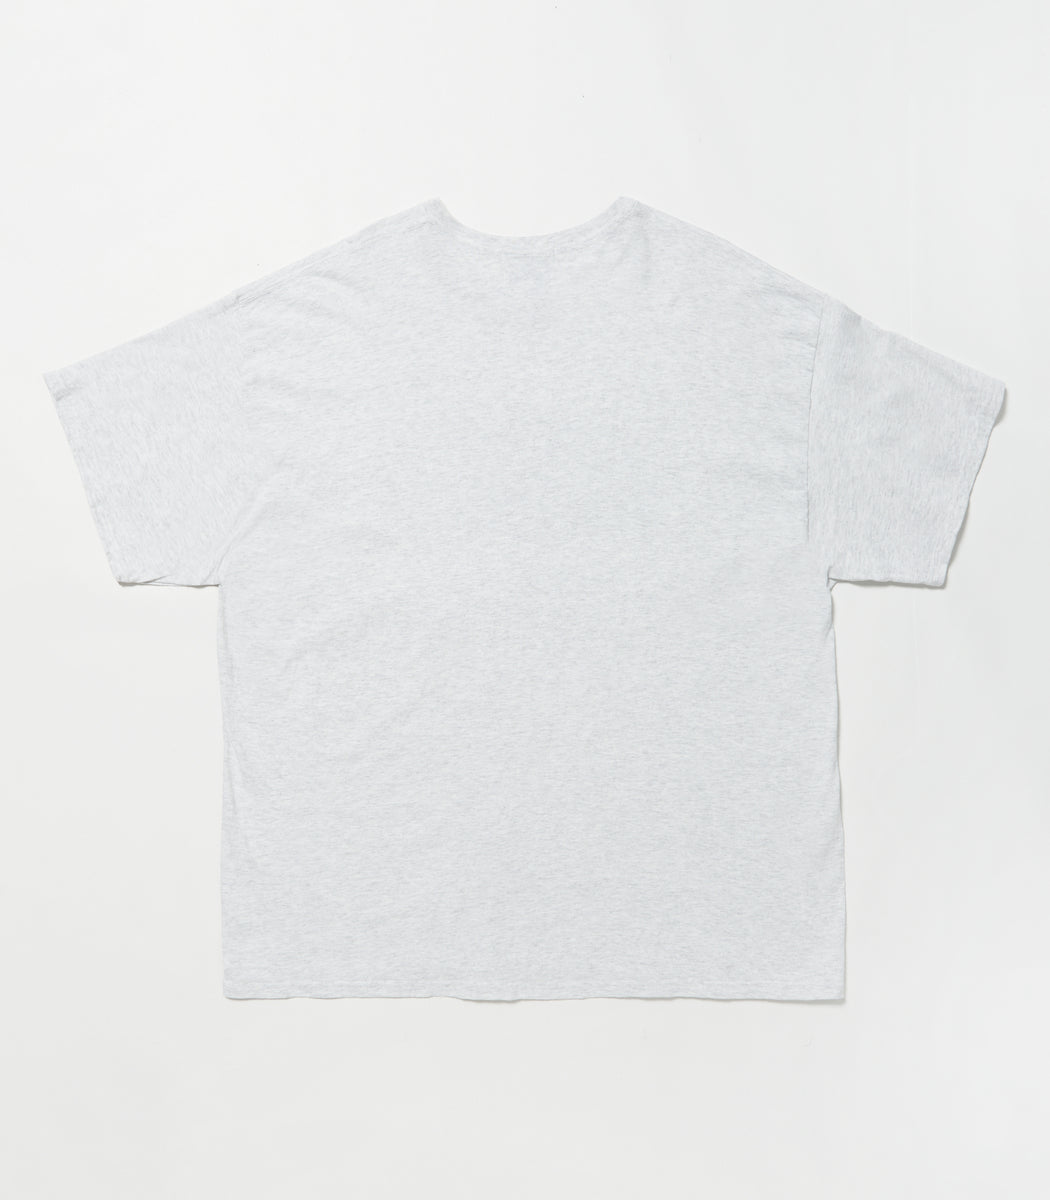 Load image into Gallery viewer, PasTime TEE HEATHER GRAY
